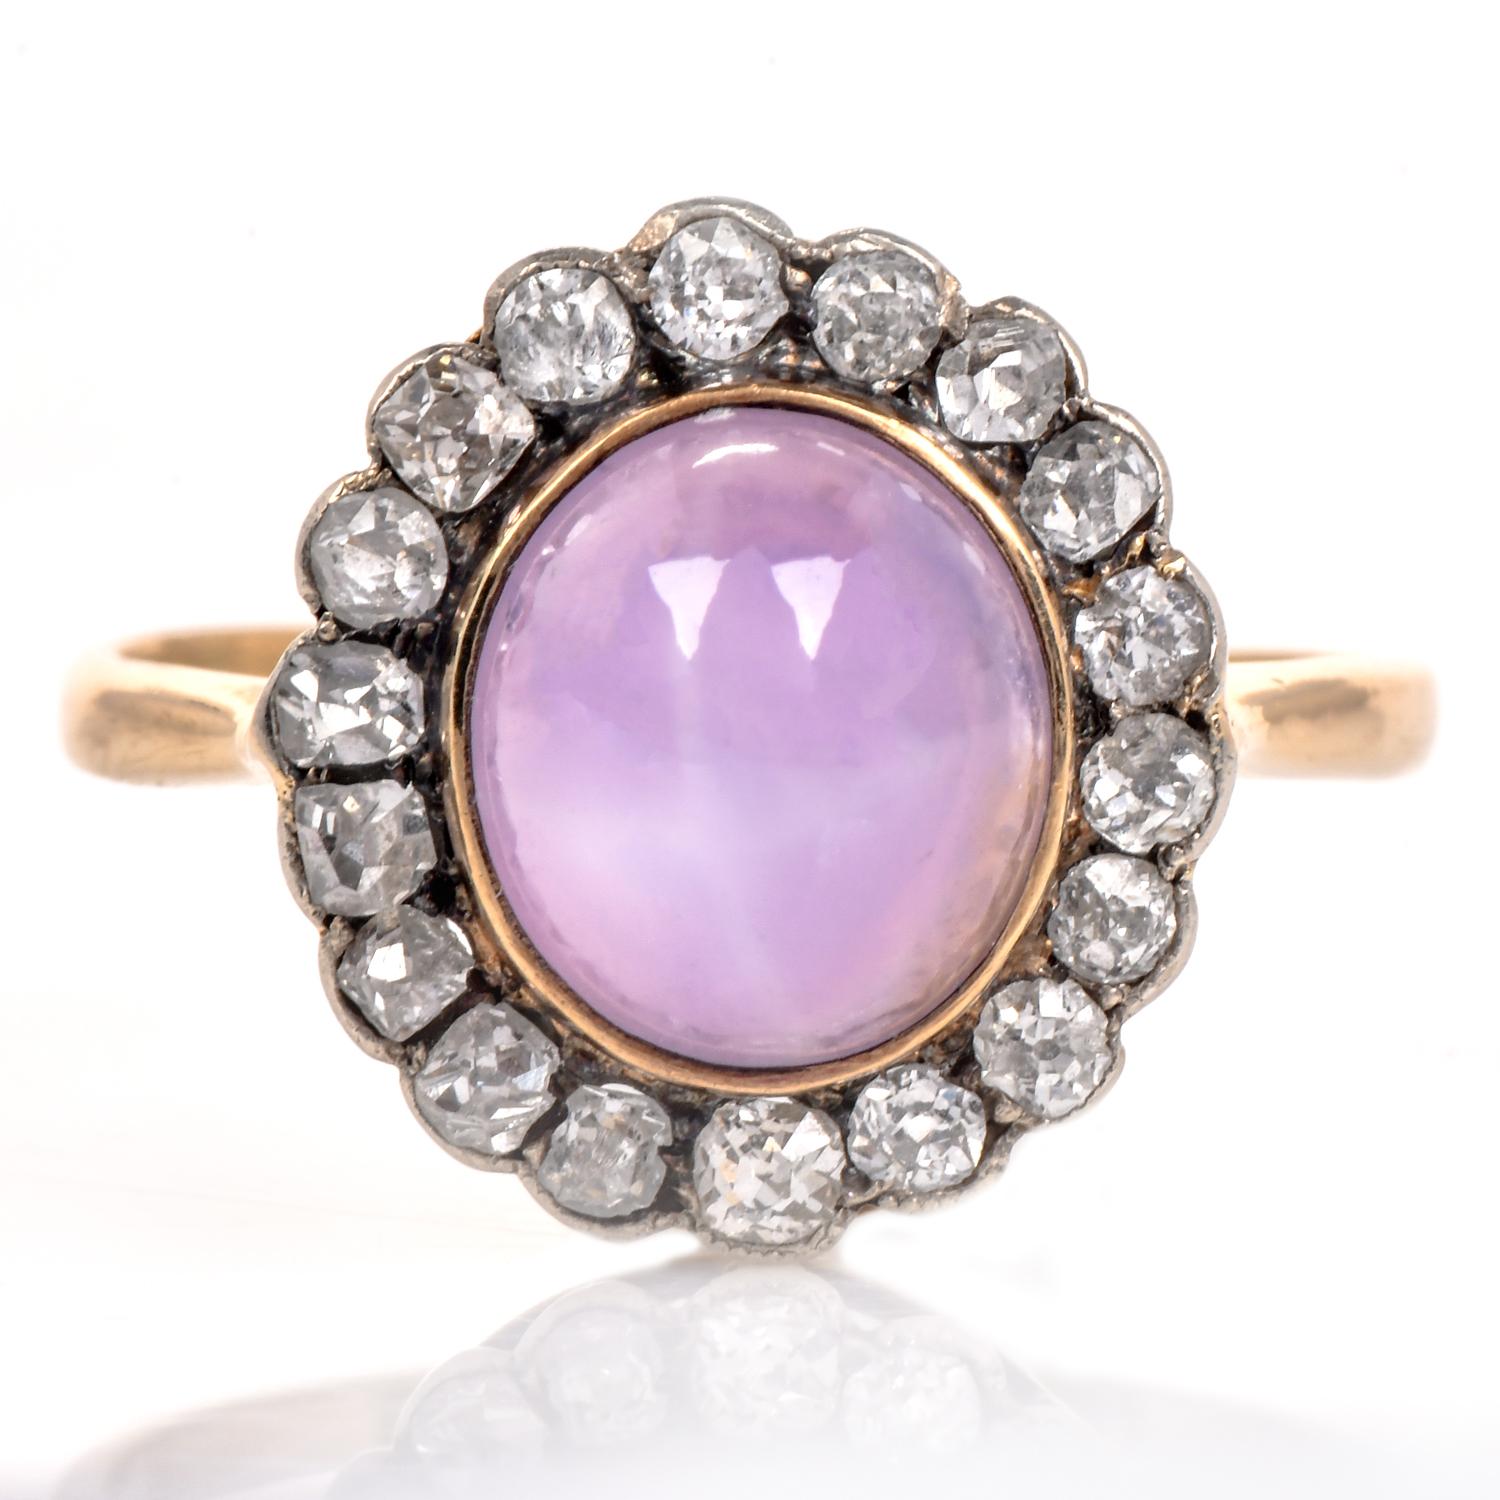 A Classic vintage Halo band adorned with diamonds and sapphire, crafted in 18K yellow gold.
GIA Certified Pink-Purple Star Cabochon Oval Sapphire is the heart of the Ring with single-cut natural halo set diamonds
GIA report #6183600501 
Metal: 18K